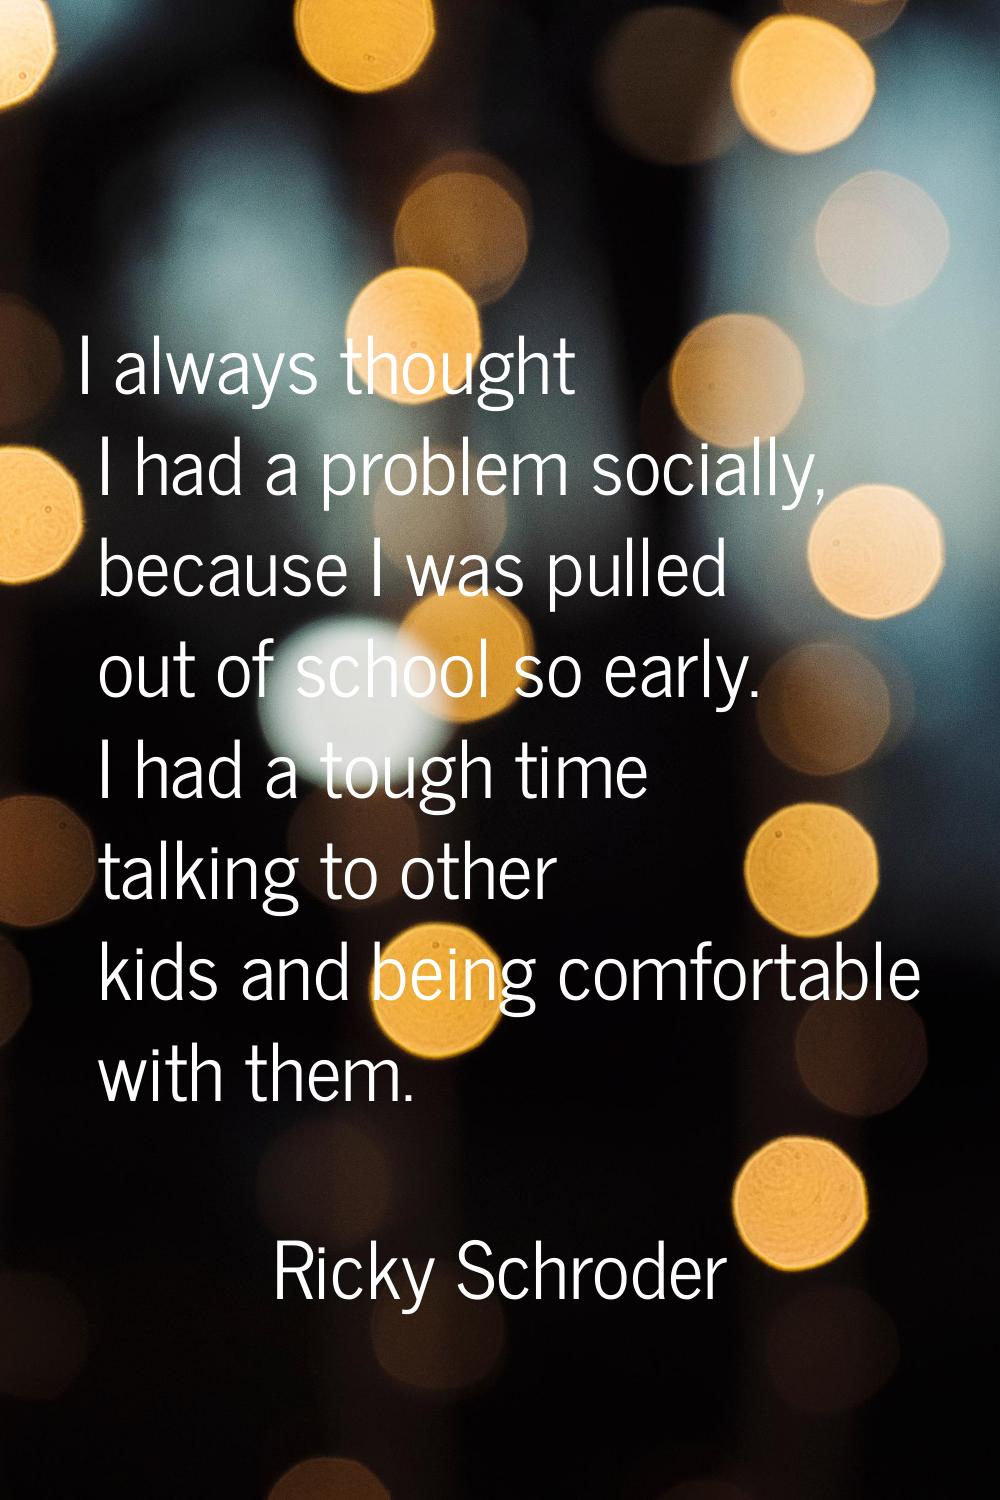 I always thought I had a problem socially, because I was pulled out of school so early. I had a tou